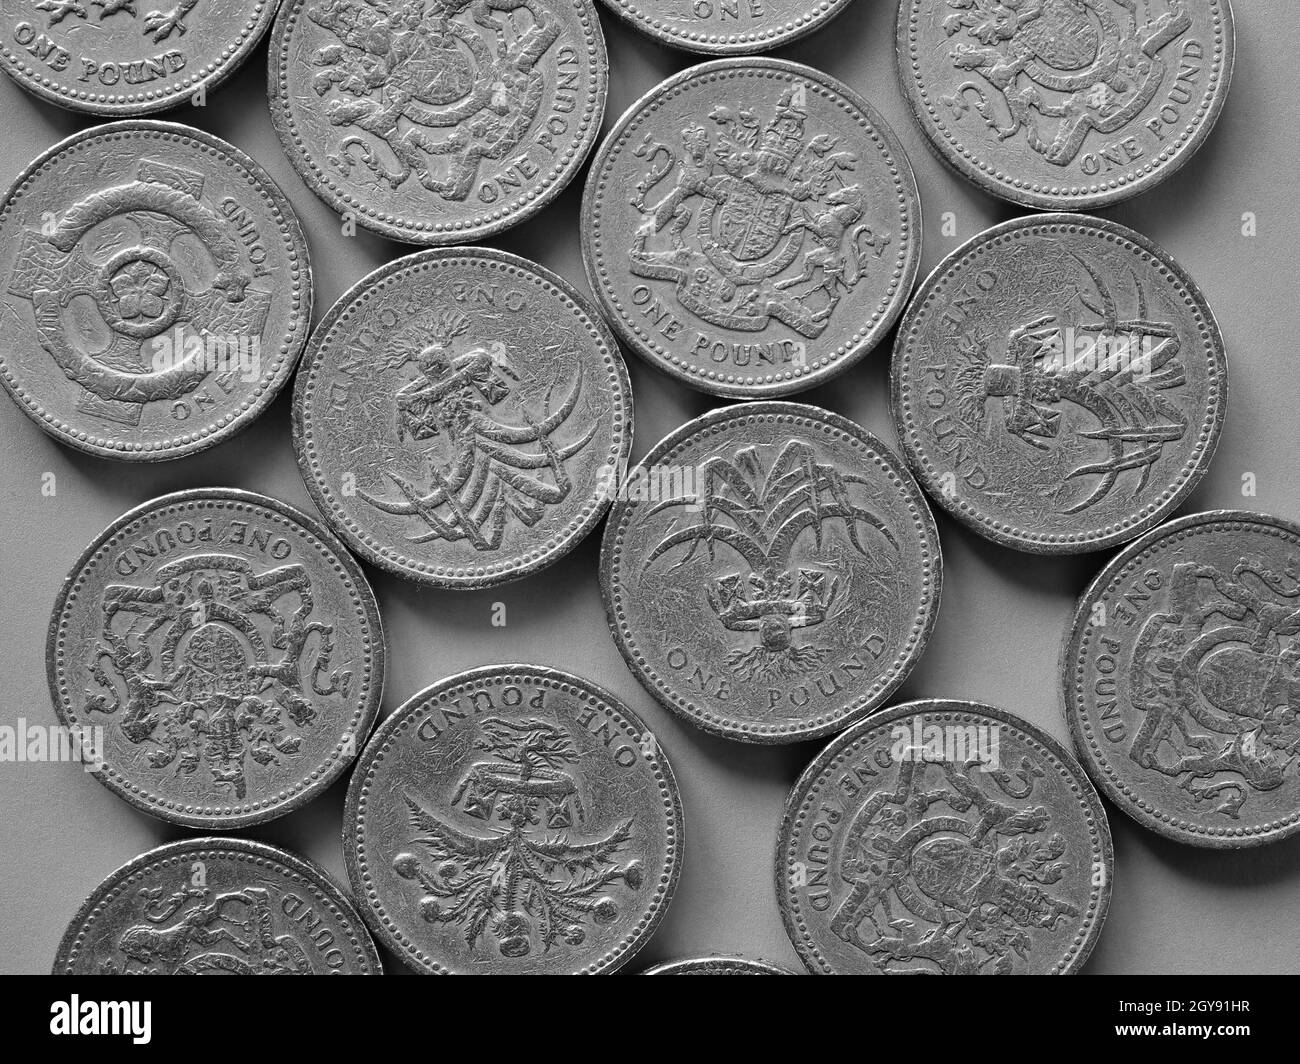 Pound coins money (GBP), currency of United Kingdom - One Pound coin in black and white Stock Photo